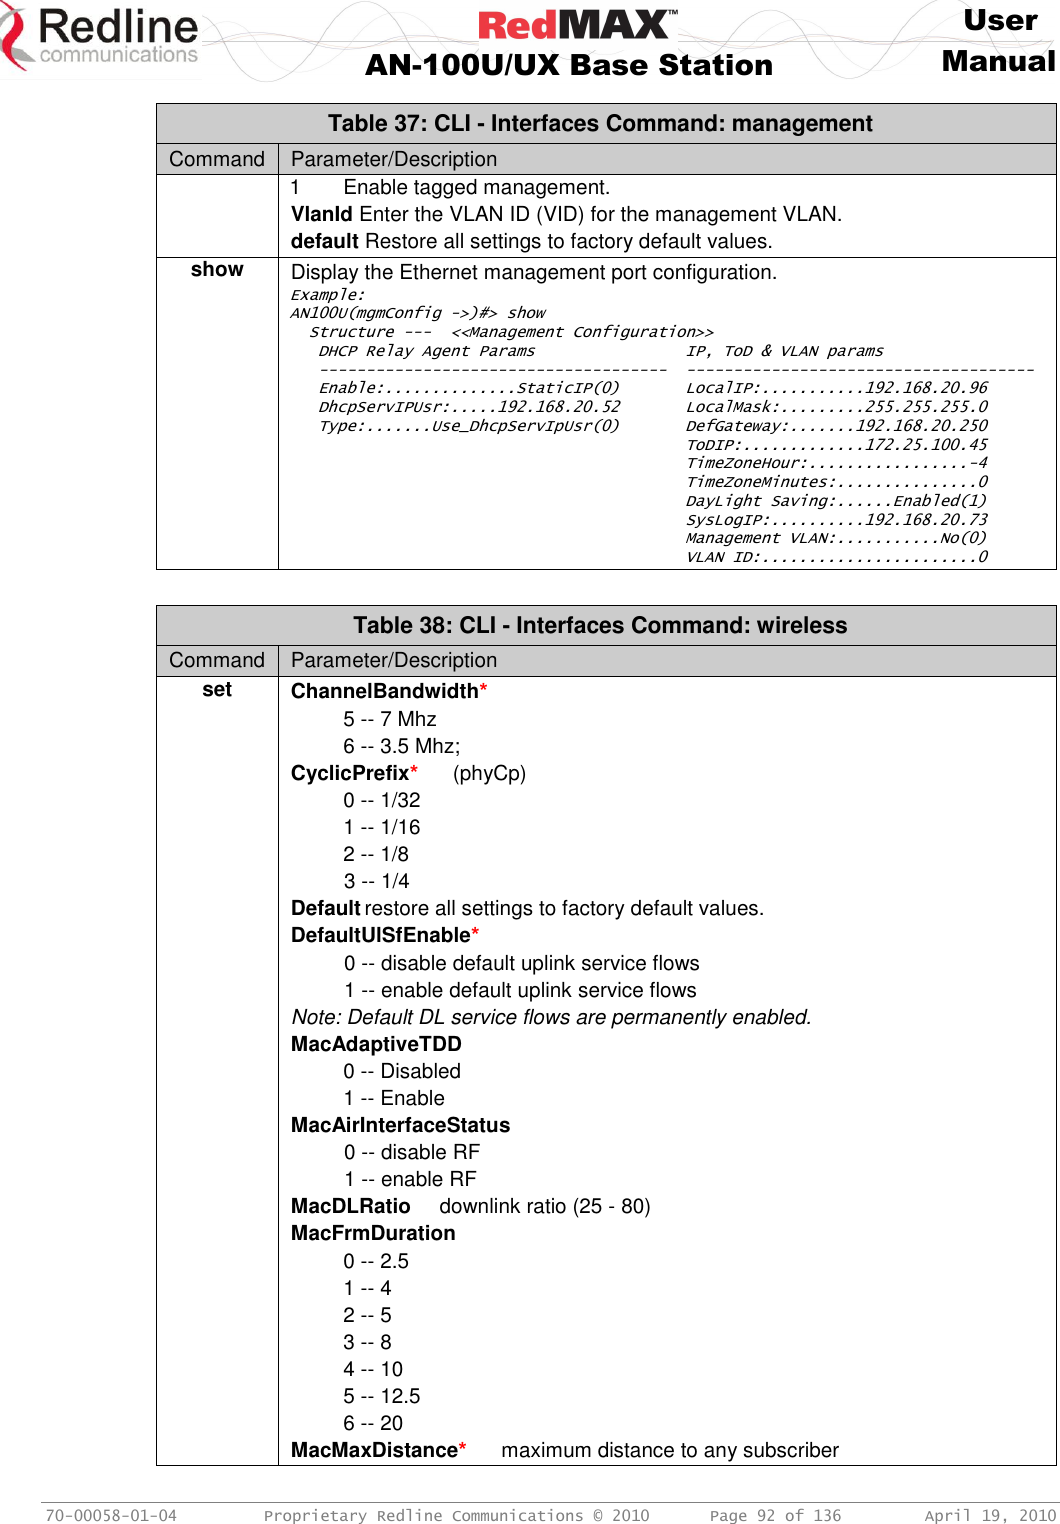     User  AN-100U/UX Base Station Manual   70-00058-01-04  Proprietary Redline Communications © 2010   Page 92 of 136  April 19, 2010 Table 37: CLI - Interfaces Command: management Command Parameter/Description 1  Enable tagged management. VlanId Enter the VLAN ID (VID) for the management VLAN. default Restore all settings to factory default values. show Display the Ethernet management port configuration. Example: AN100U(mgmConfig -&gt;)#&gt; show   Structure ---  &lt;&lt;Management Configuration&gt;&gt;    DHCP Relay Agent Params                IP, ToD &amp; VLAN params    -------------------------------------  -------------------------------------    Enable:..............StaticIP(0)       LocalIP:...........192.168.20.96    DhcpServIPUsr:.....192.168.20.52       LocalMask:.........255.255.255.0    Type:.......Use_DhcpServIpUsr(0)       DefGateway:.......192.168.20.250                                           ToDIP:.............172.25.100.45                                           TimeZoneHour:.................-4                                           TimeZoneMinutes:...............0                                           DayLight Saving:......Enabled(1)                                           SysLogIP:..........192.168.20.73                                           Management VLAN:...........No(0)                                           VLAN ID:.......................0  Table 38: CLI - Interfaces Command: wireless Command Parameter/Description set ChannelBandwidth*  5 -- 7 Mhz  6 -- 3.5 Mhz; CyclicPrefix*      (phyCp)  0 -- 1/32  1 -- 1/16  2 -- 1/8  3 -- 1/4 Default restore all settings to factory default values. DefaultUlSfEnable*  0 -- disable default uplink service flows  1 -- enable default uplink service flows Note: Default DL service flows are permanently enabled. MacAdaptiveTDD     0 -- Disabled  1 -- Enable MacAirInterfaceStatus  0 -- disable RF  1 -- enable RF MacDLRatio  downlink ratio (25 - 80) MacFrmDuration  0 -- 2.5  1 -- 4  2 -- 5  3 -- 8  4 -- 10  5 -- 12.5  6 -- 20 MacMaxDistance*      maximum distance to any subscriber 